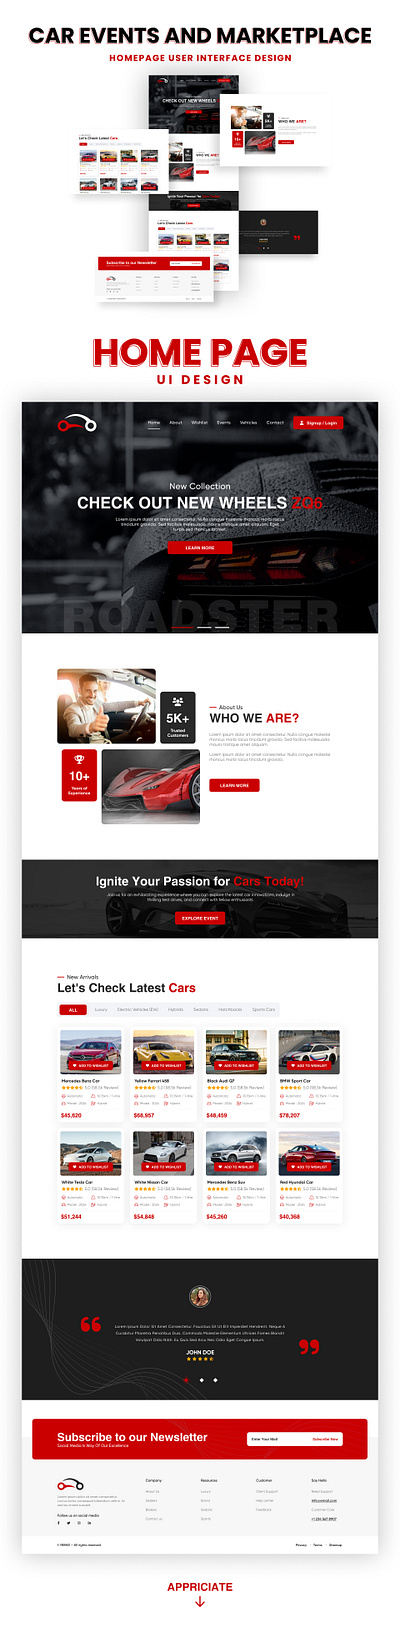 Car Marketplace Landing Page UI Design buy car events car sell cars earn event booking event creating events feedback home marketplace multi vendor sale shopping